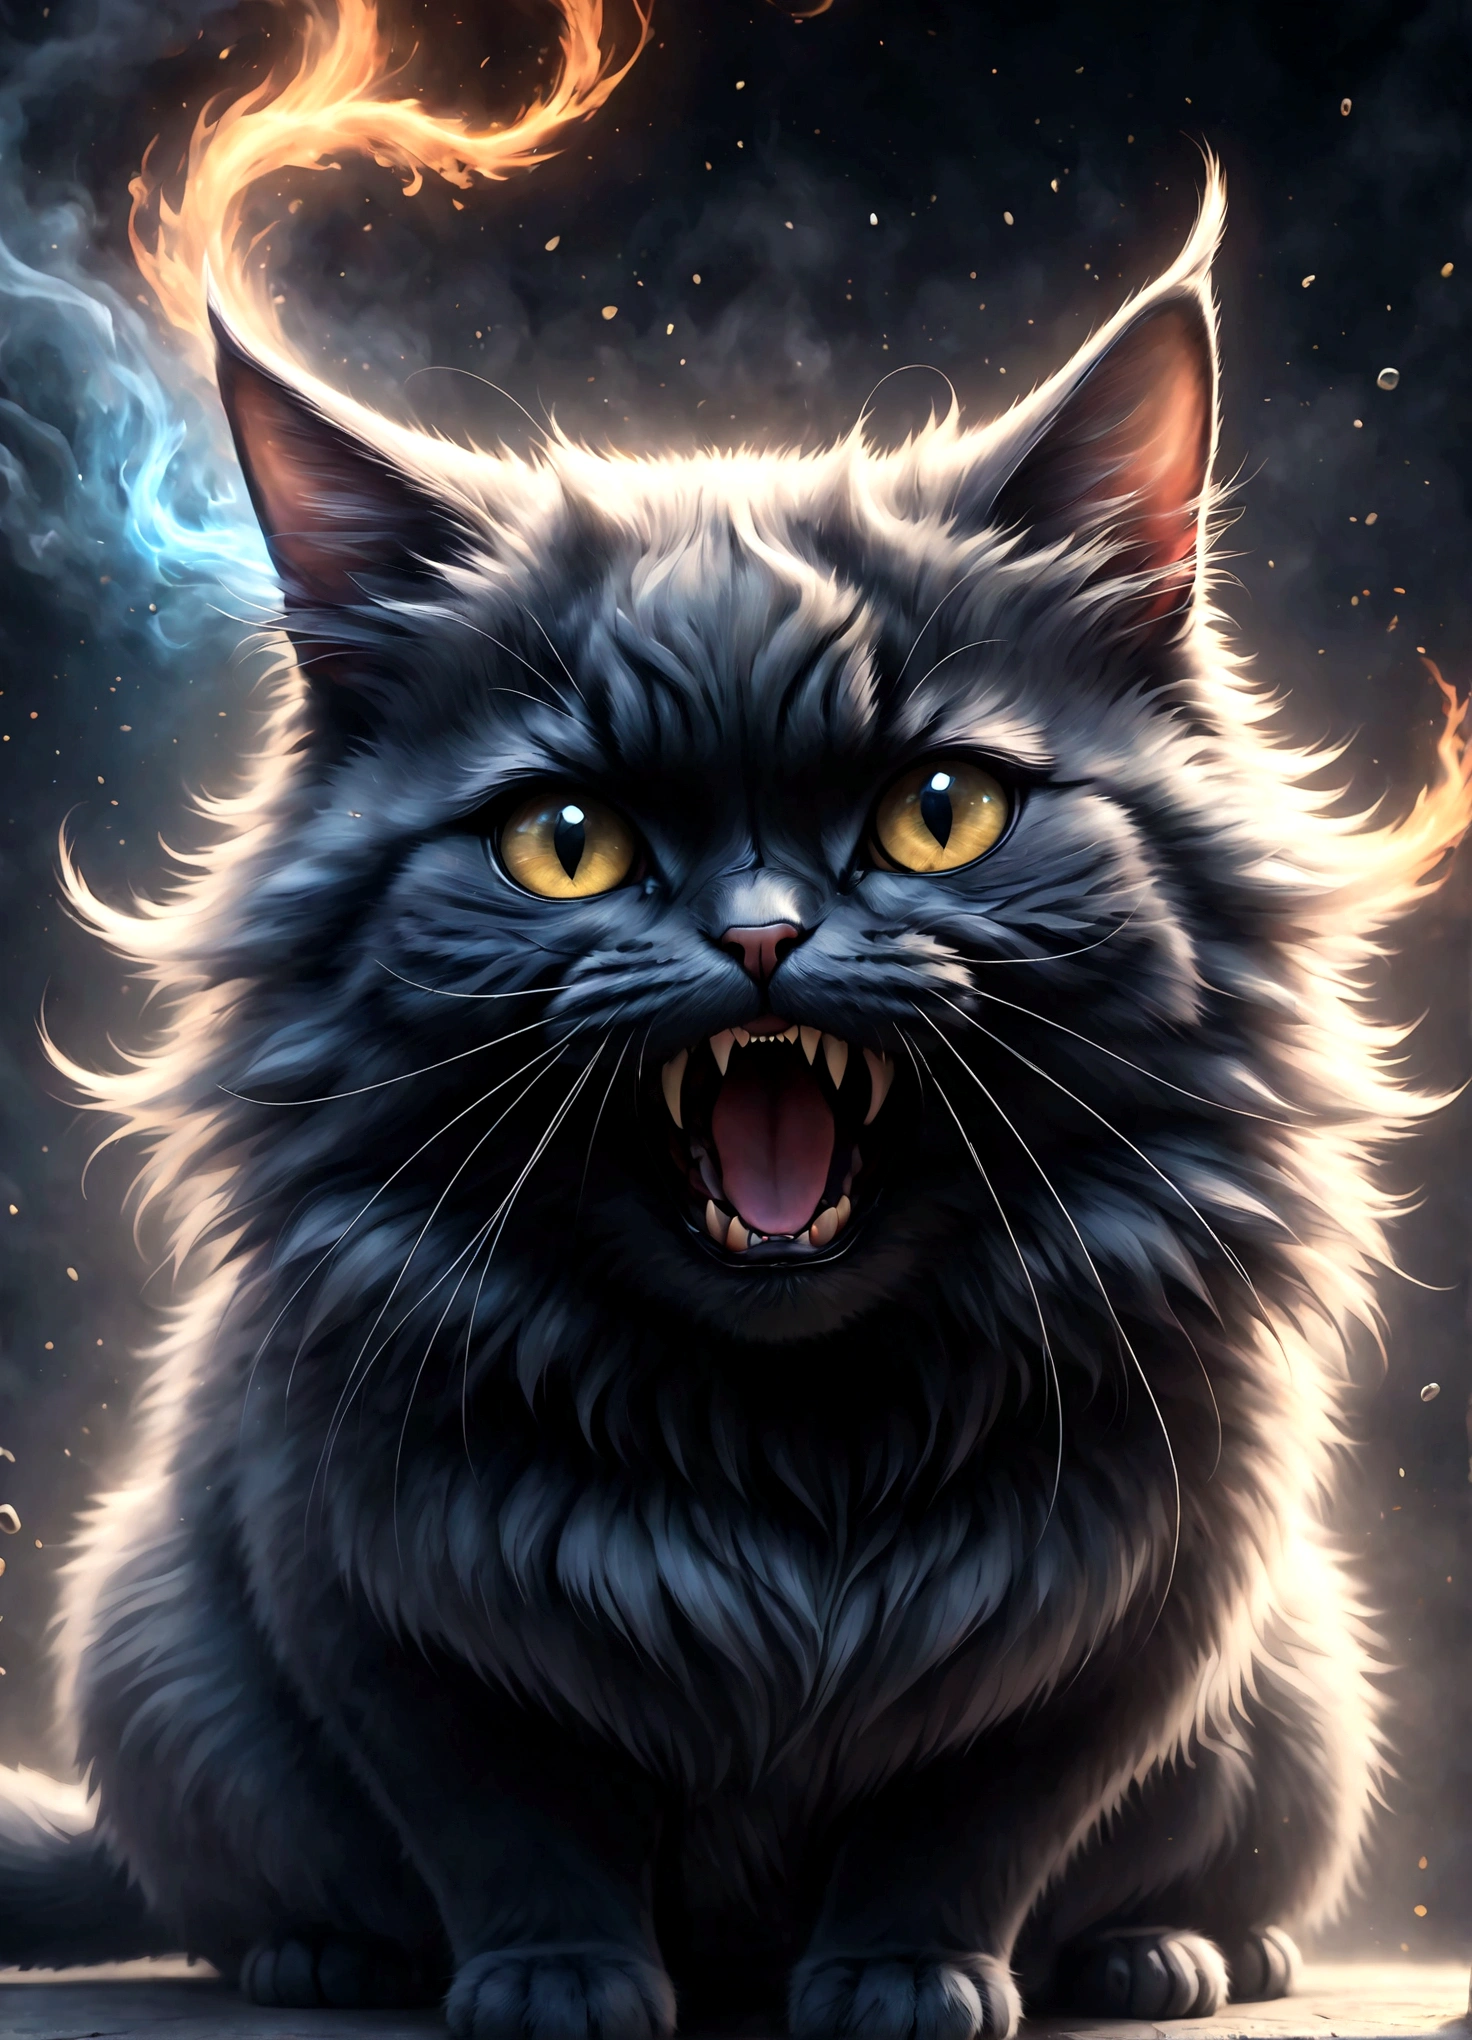 Photo of a cat that hates humans,(Cat 1,Photoreal,focus on reality,disgust that cannot be hidden,((Sense of distrust)),((anger)),((disgust)),cat with open mouth,cat showing fangs,cat's threatening behavior),fluffy cat,anatomically correct